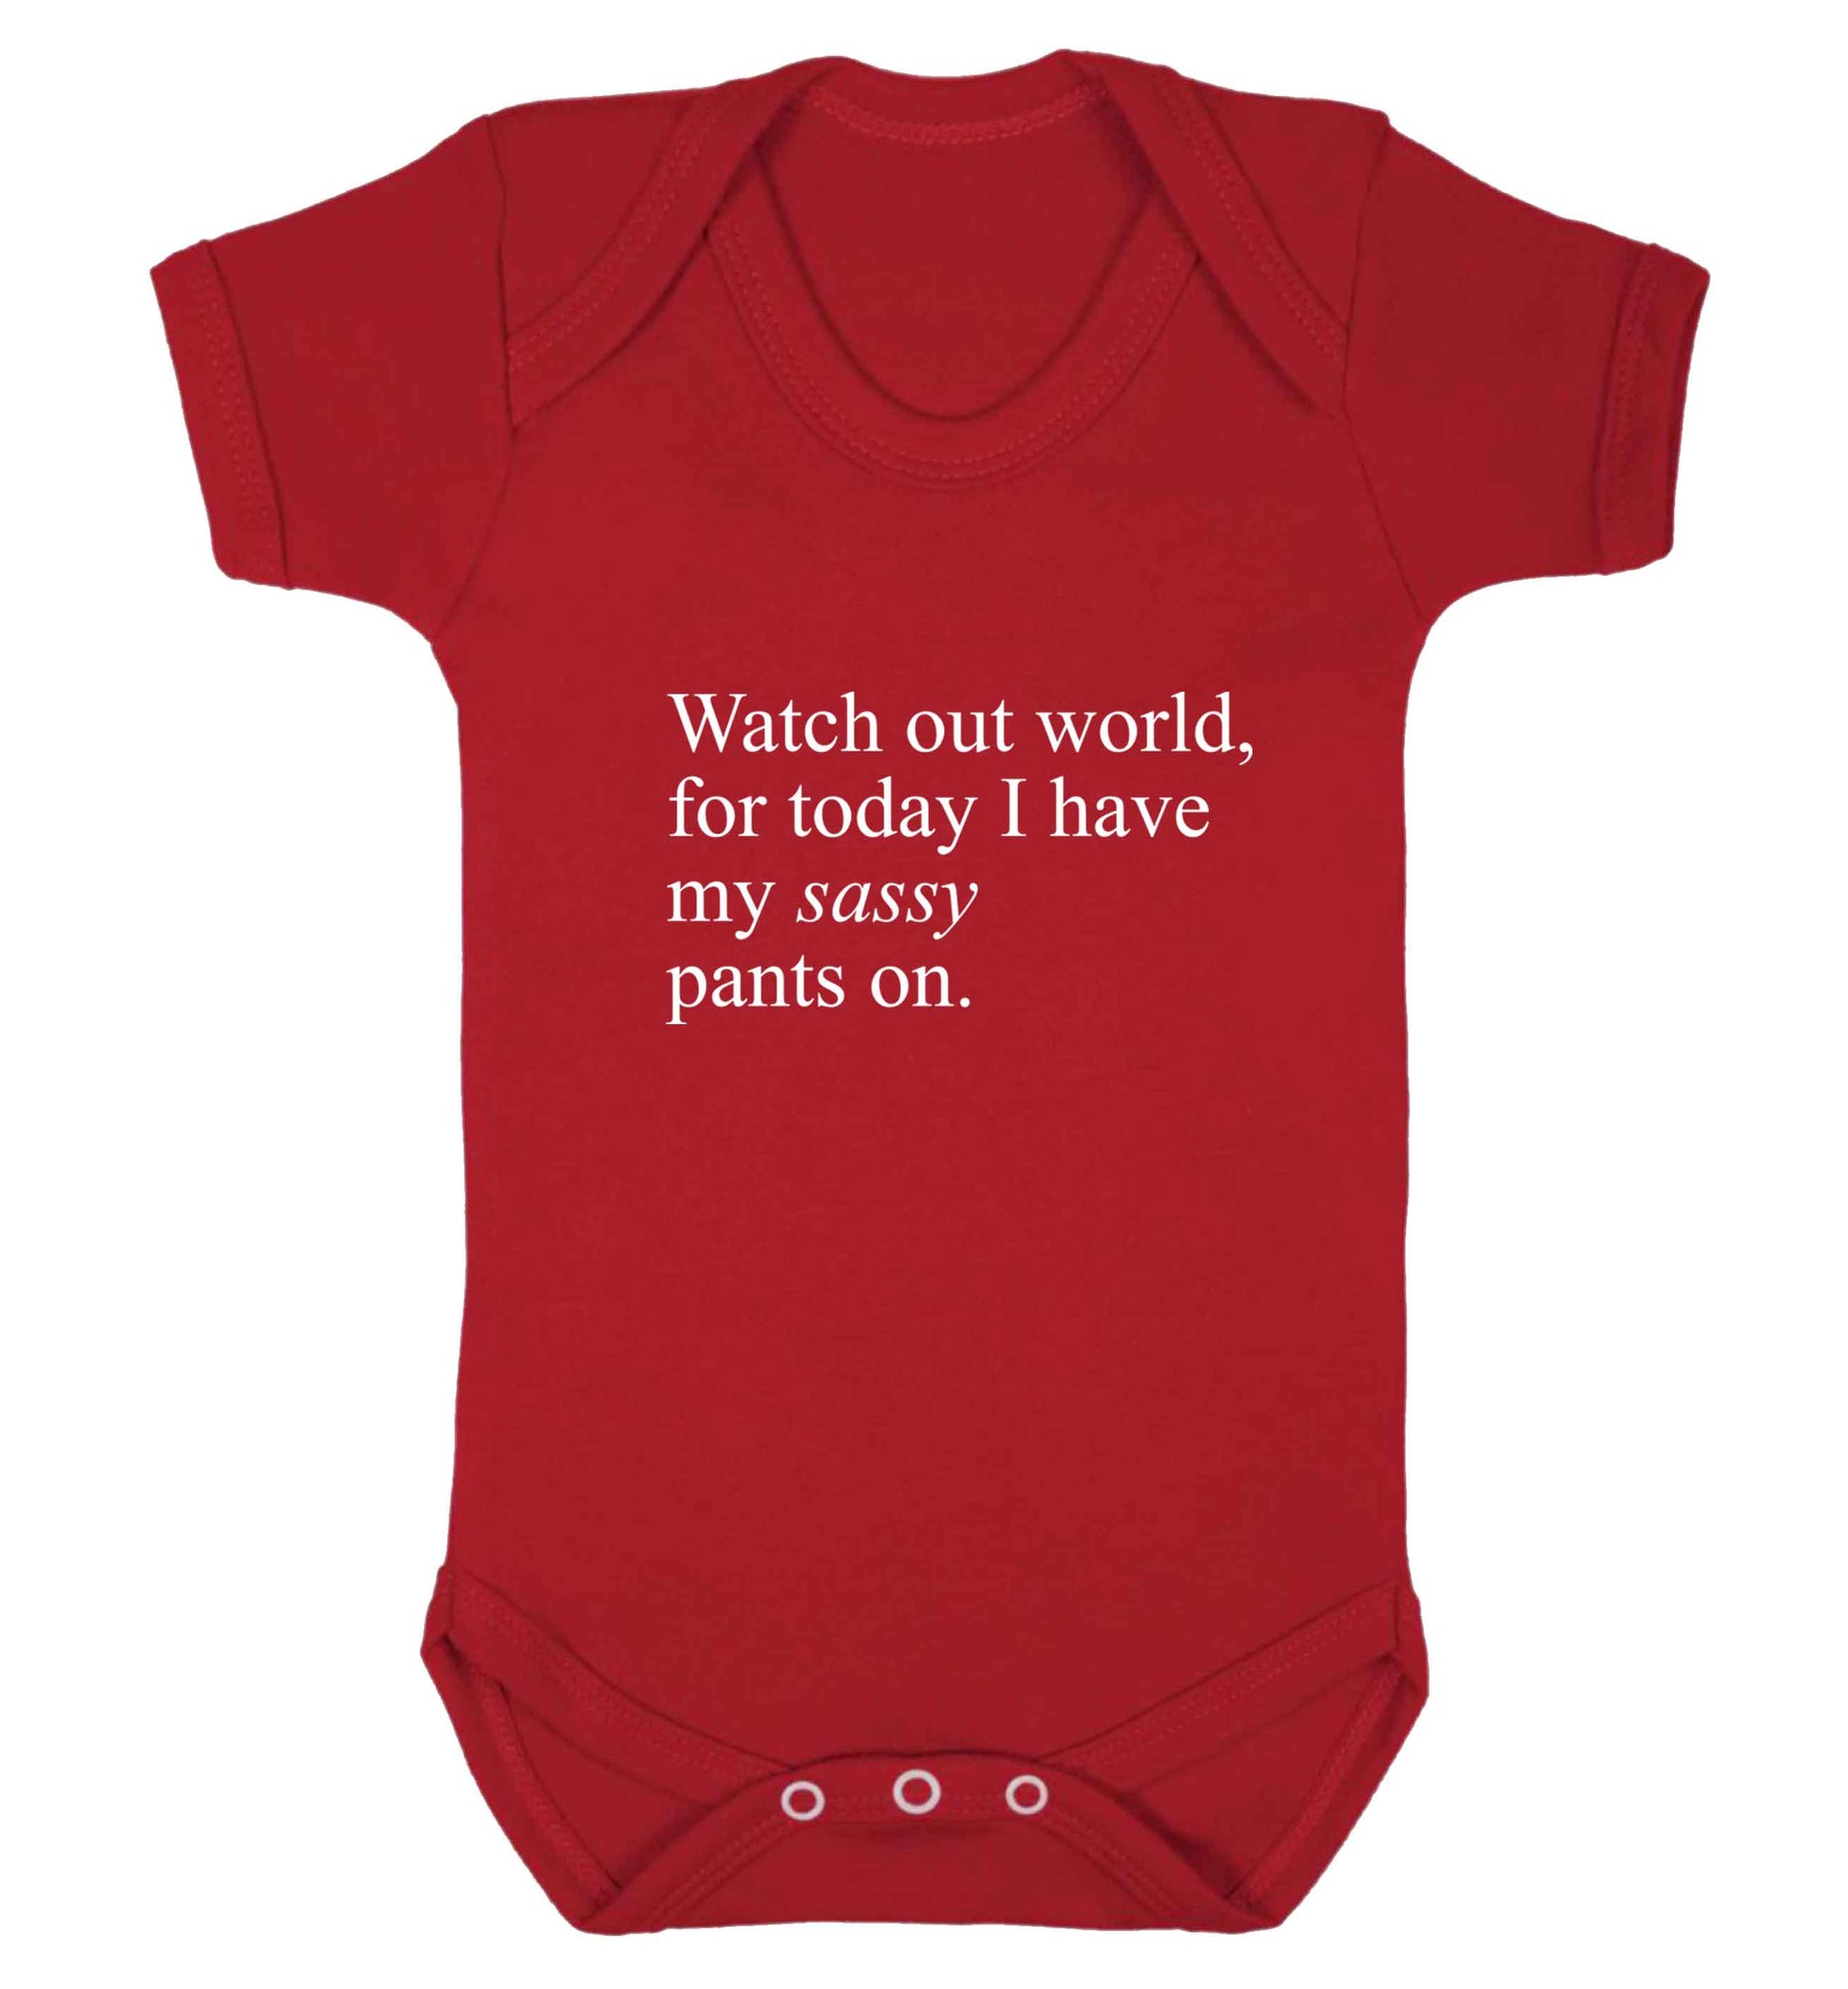 Watch out world for today I have my sassy pants on baby vest red 18-24 months